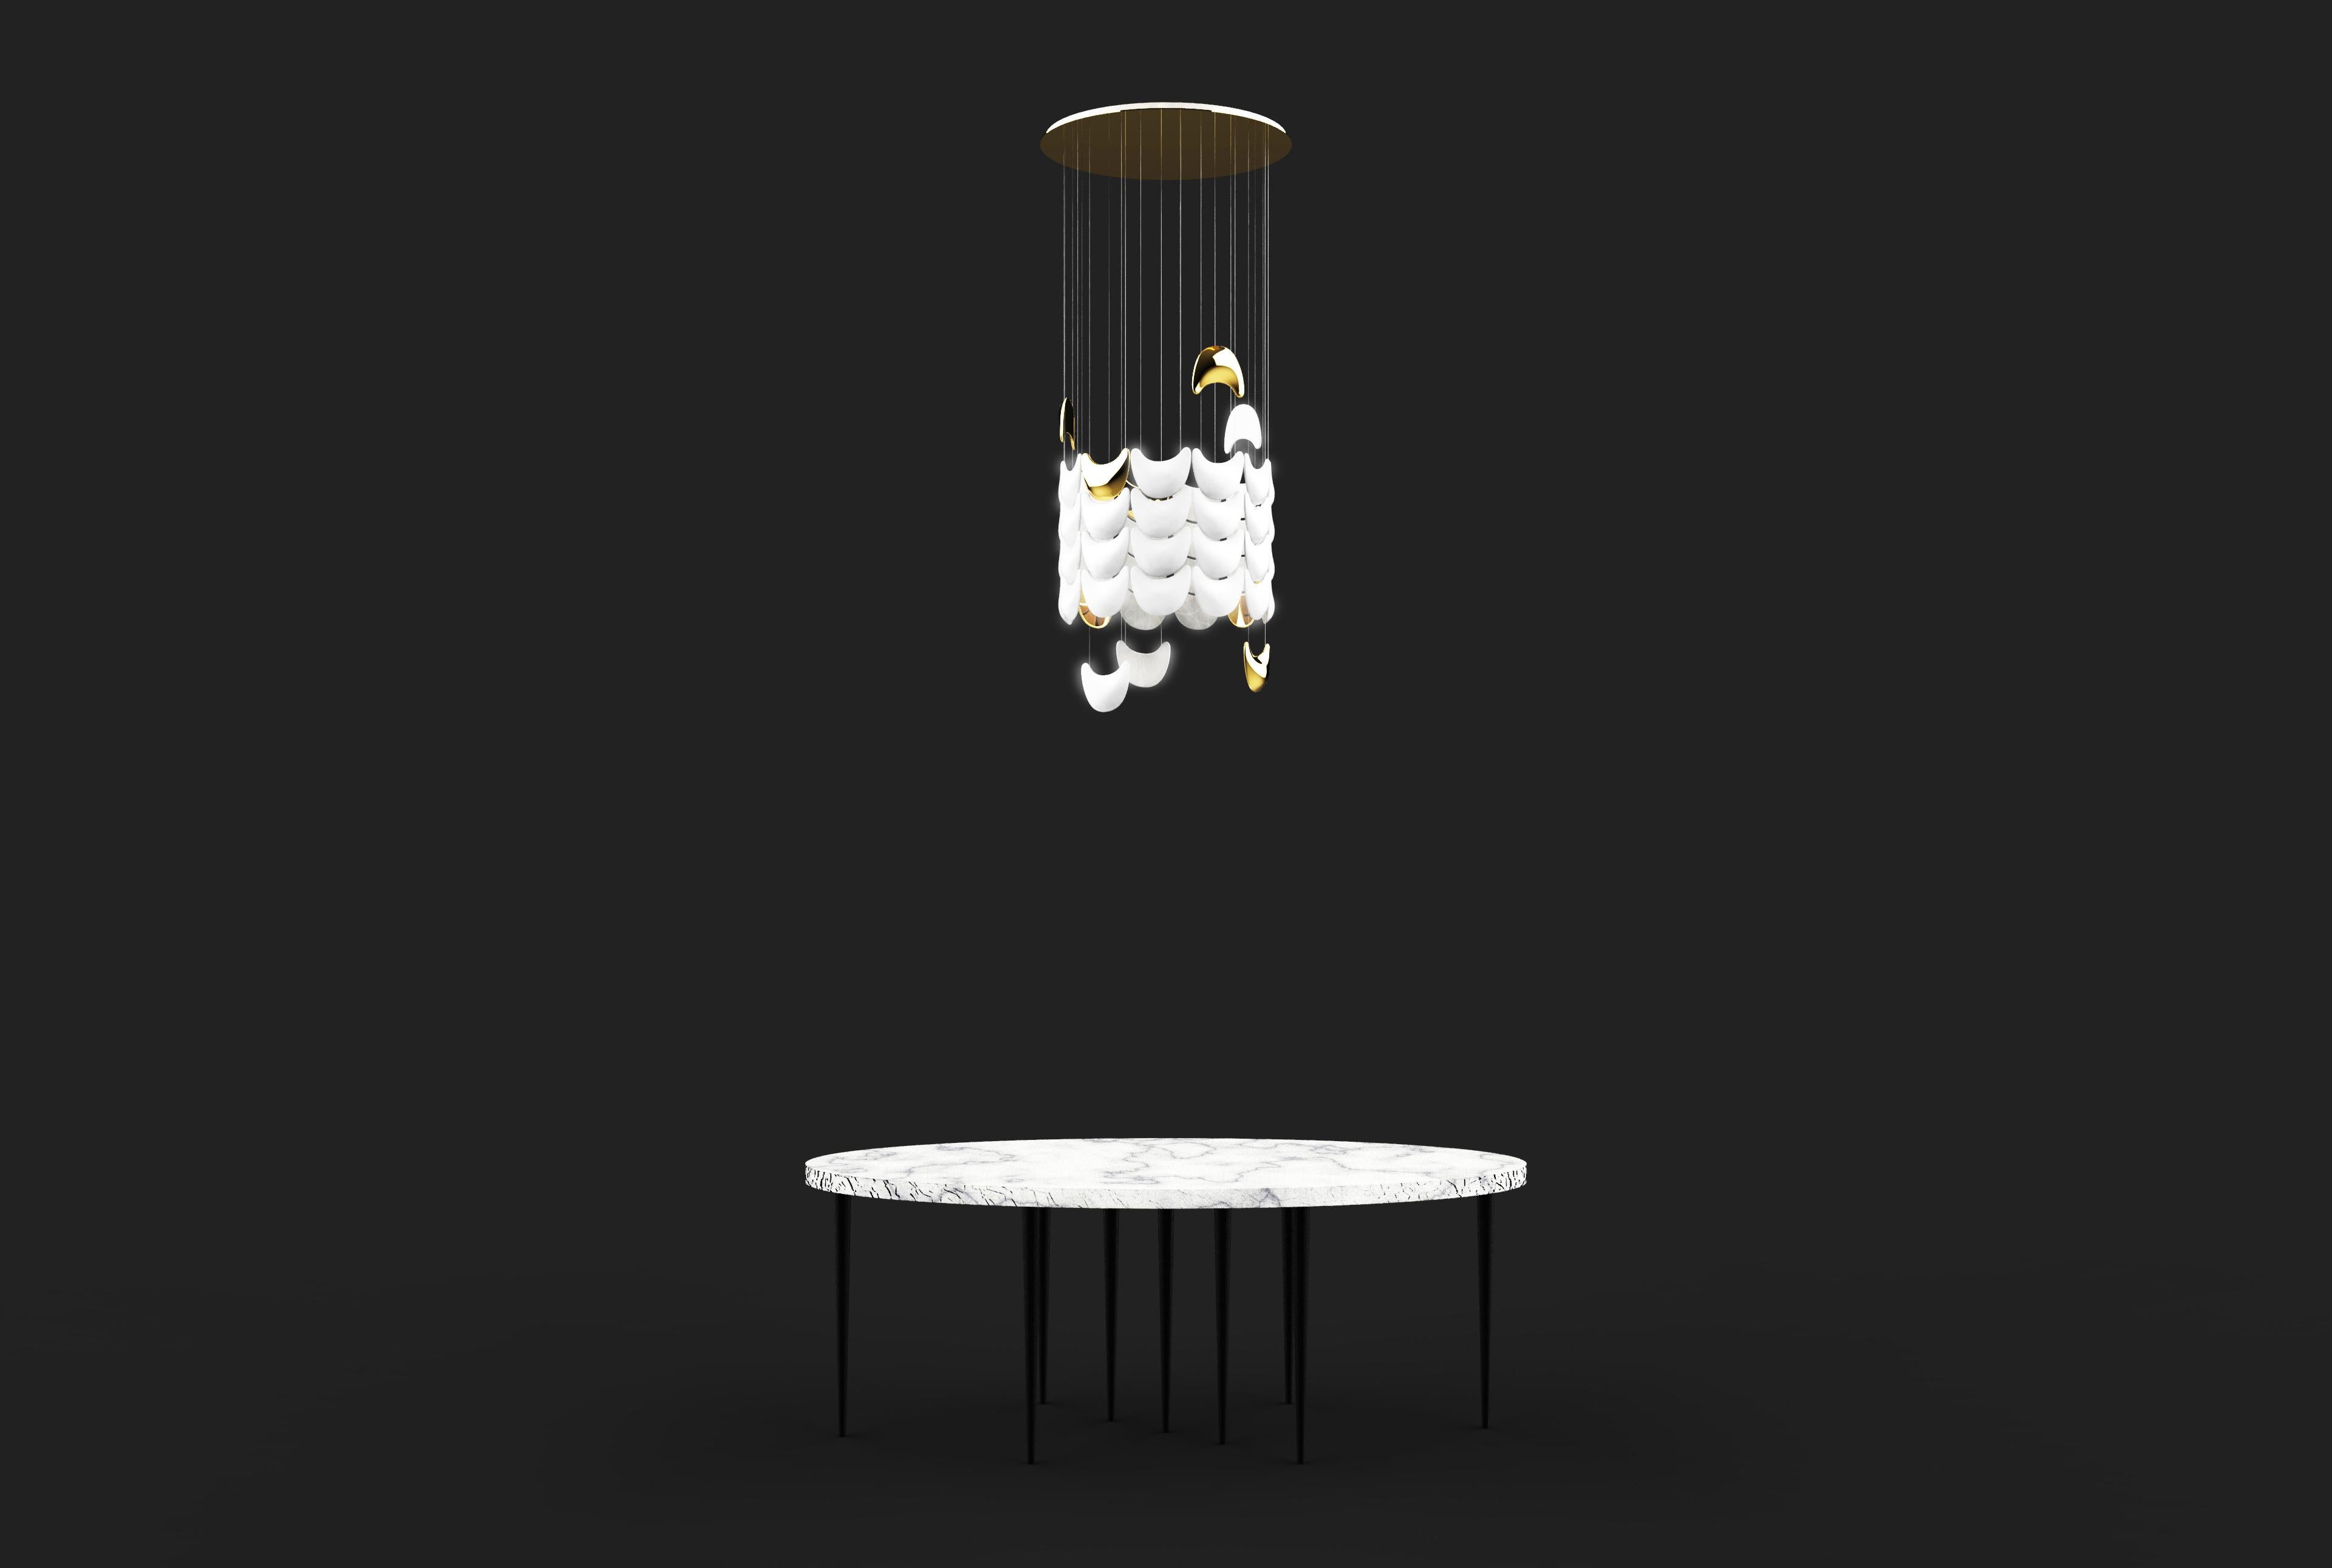 The light skin lamp shade bespoke chandelier is designed by Sylvie Maréchal and it is entirely manufactured in France. This chandelier is made of 50 Limoges porcelain scales shaped pieces of which 7 are fine golden tubes and 43 are white scales